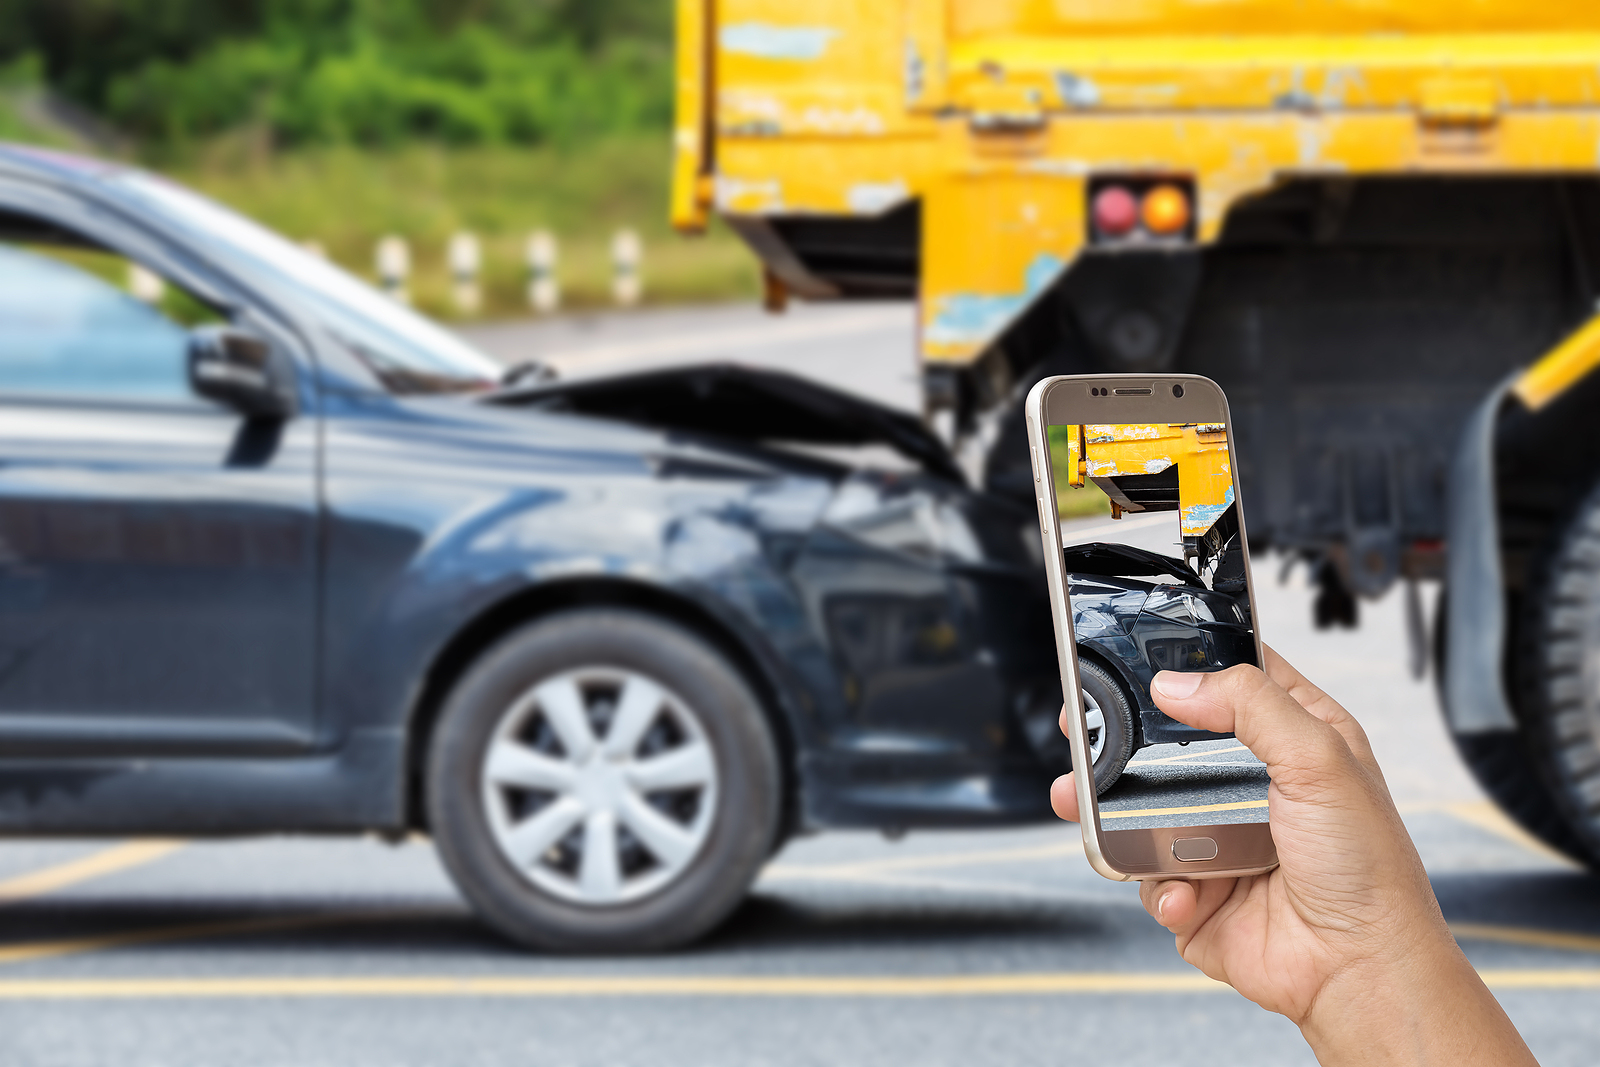 What Should You Document at the Scene of a Car Accident to Support Your Injury Claim?